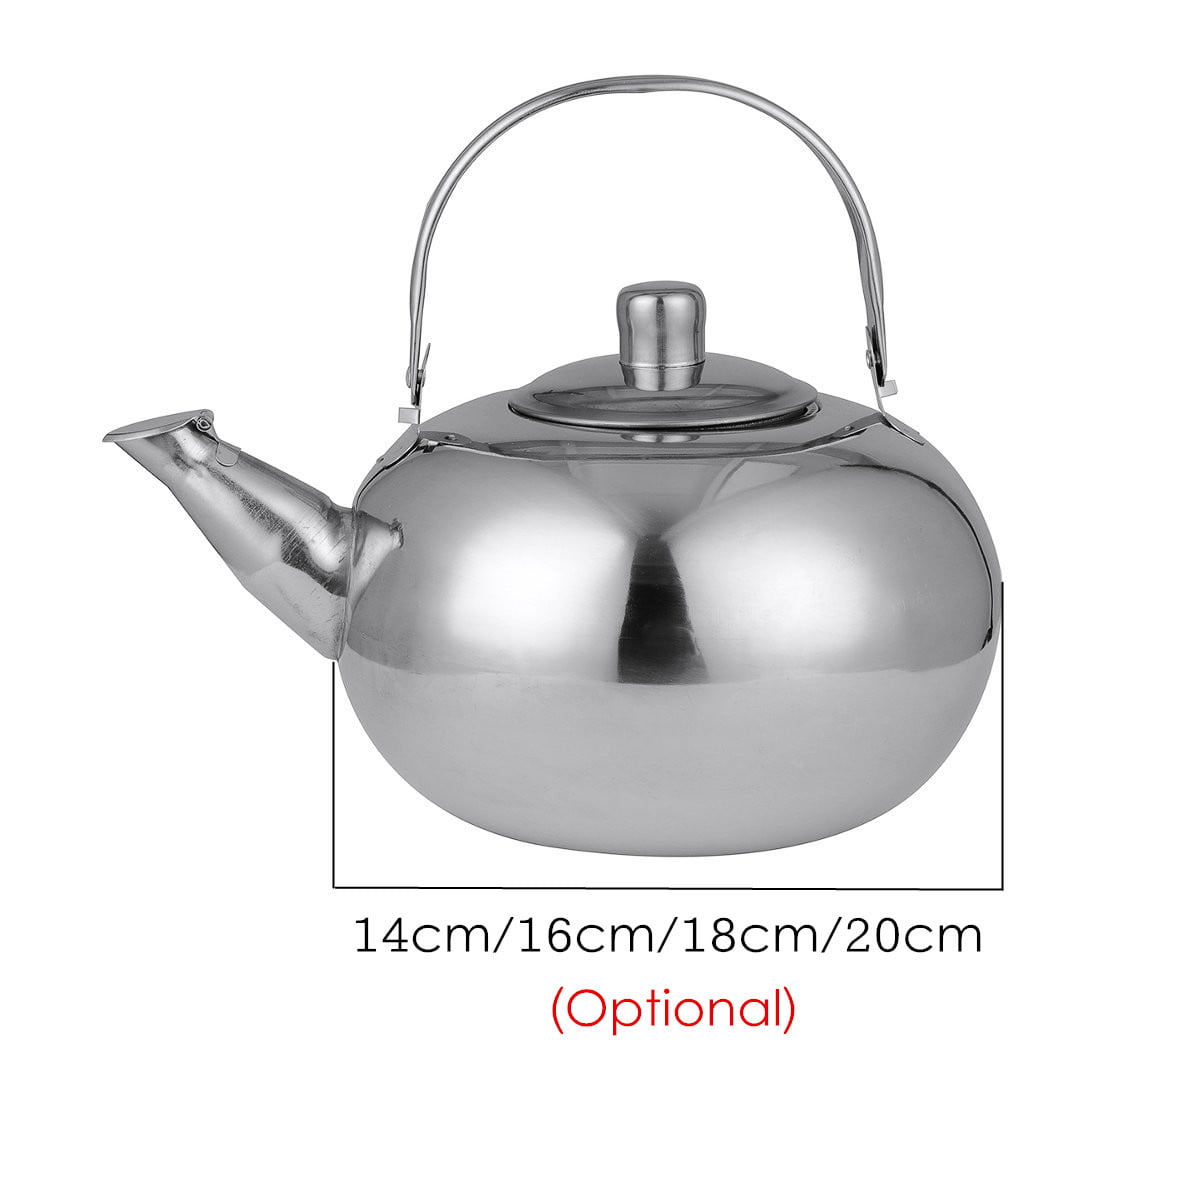 1.0/1.5/2.0/2.5L Stainless Steel Teapot Coffee Pot w/h Tea Leaf Infuser Filter 